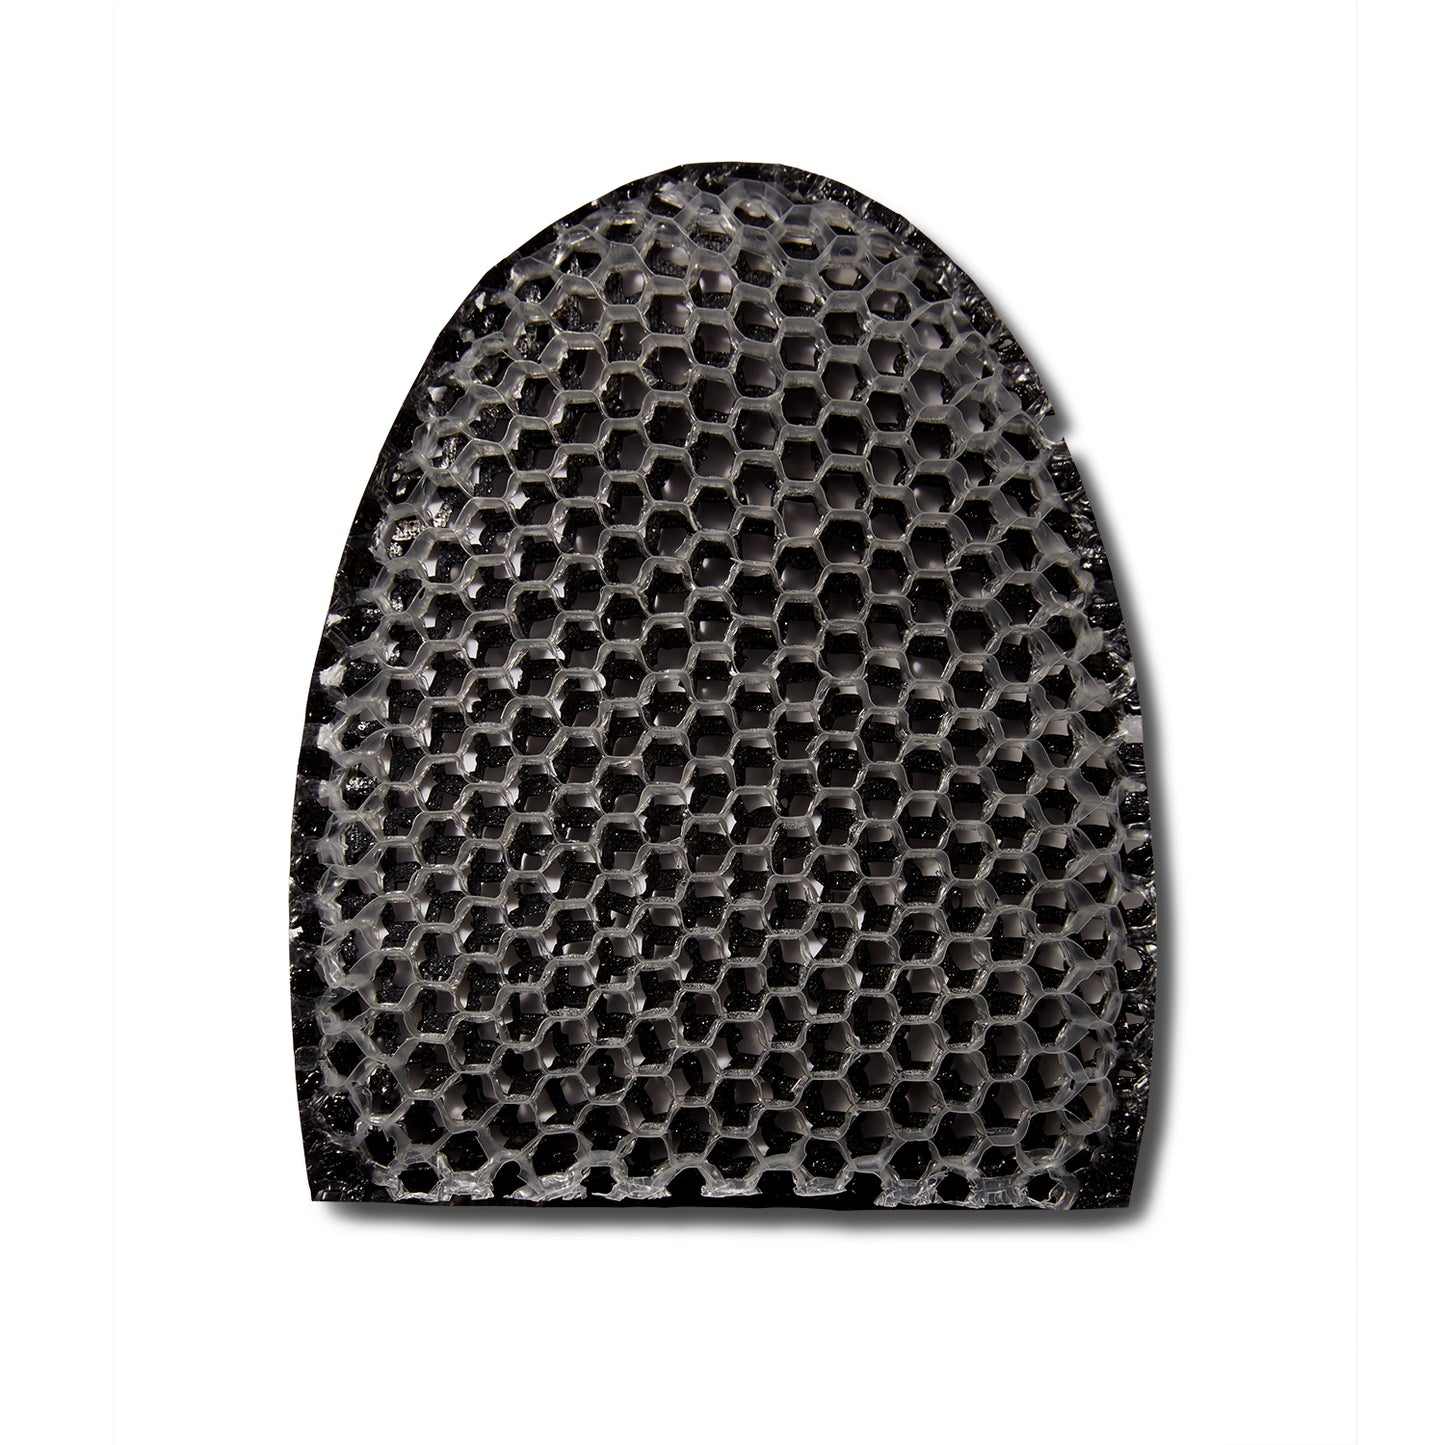 Stimulite Black & White striped honeycomb silicone Exfoliating Facial Sponge.  The honeycomb is white on this side.